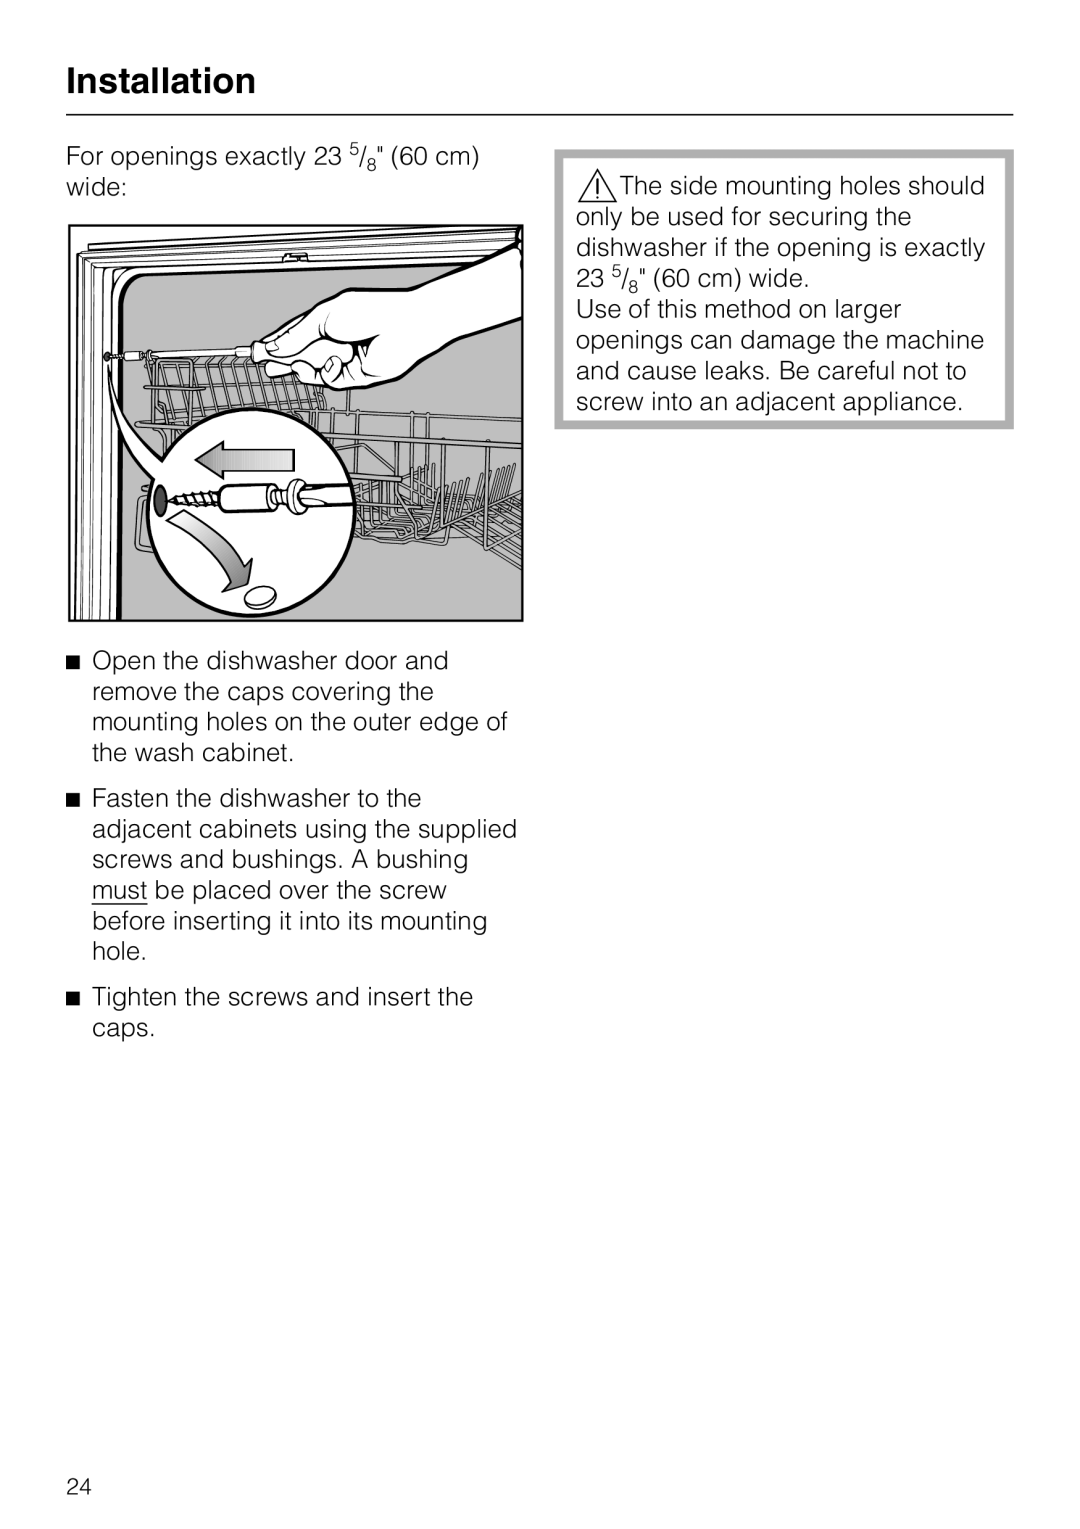 Miele HG01 installation instructions Installation, For openings exactly 